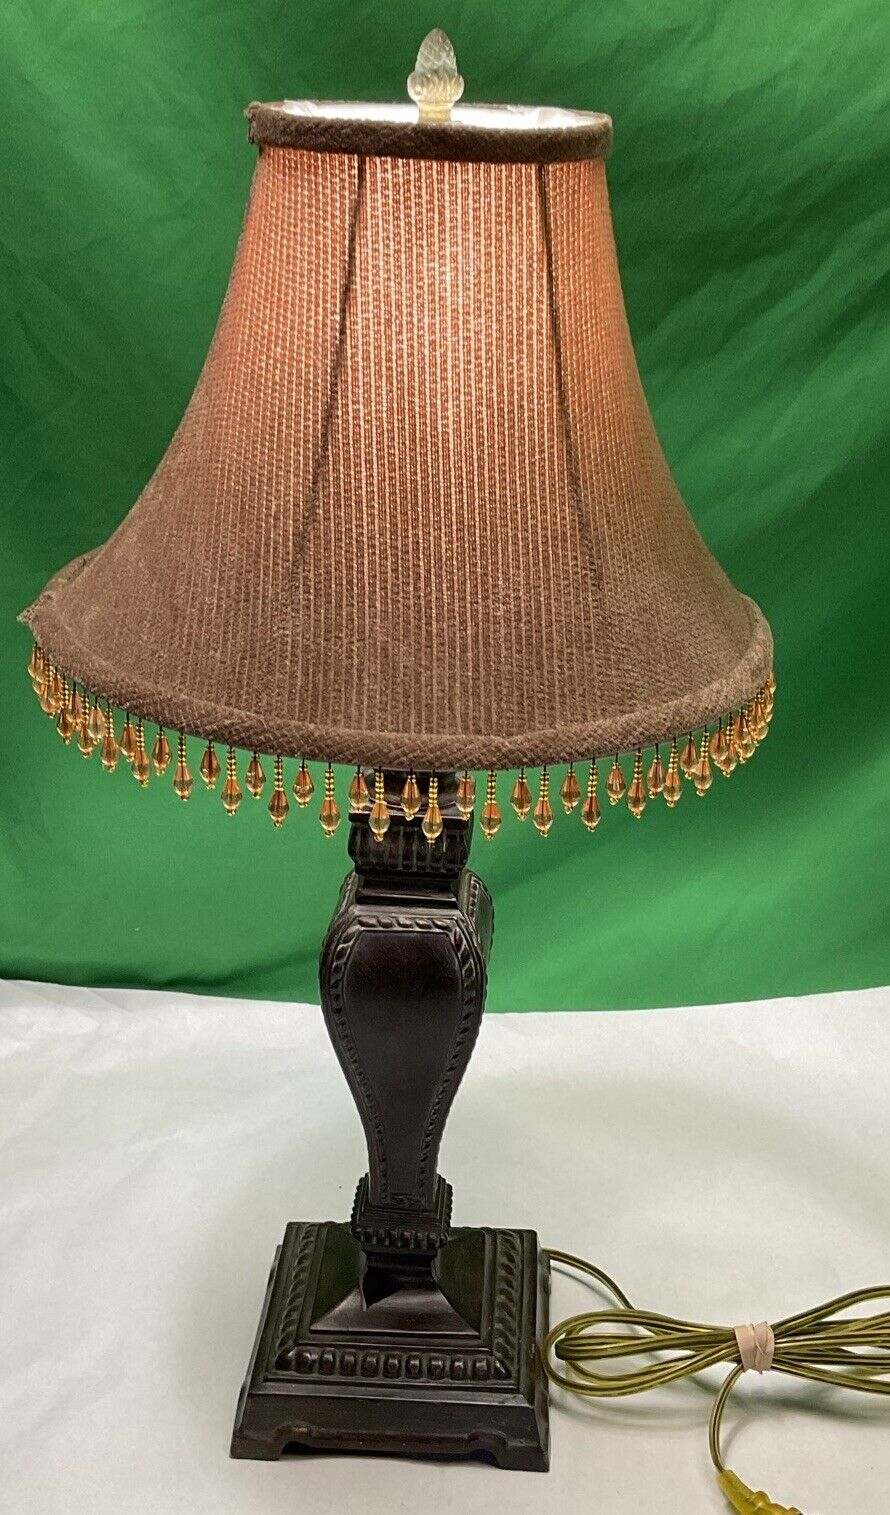 Vintage Berman Footed Table Lamp. 24” Tall - With Shade Lamp.